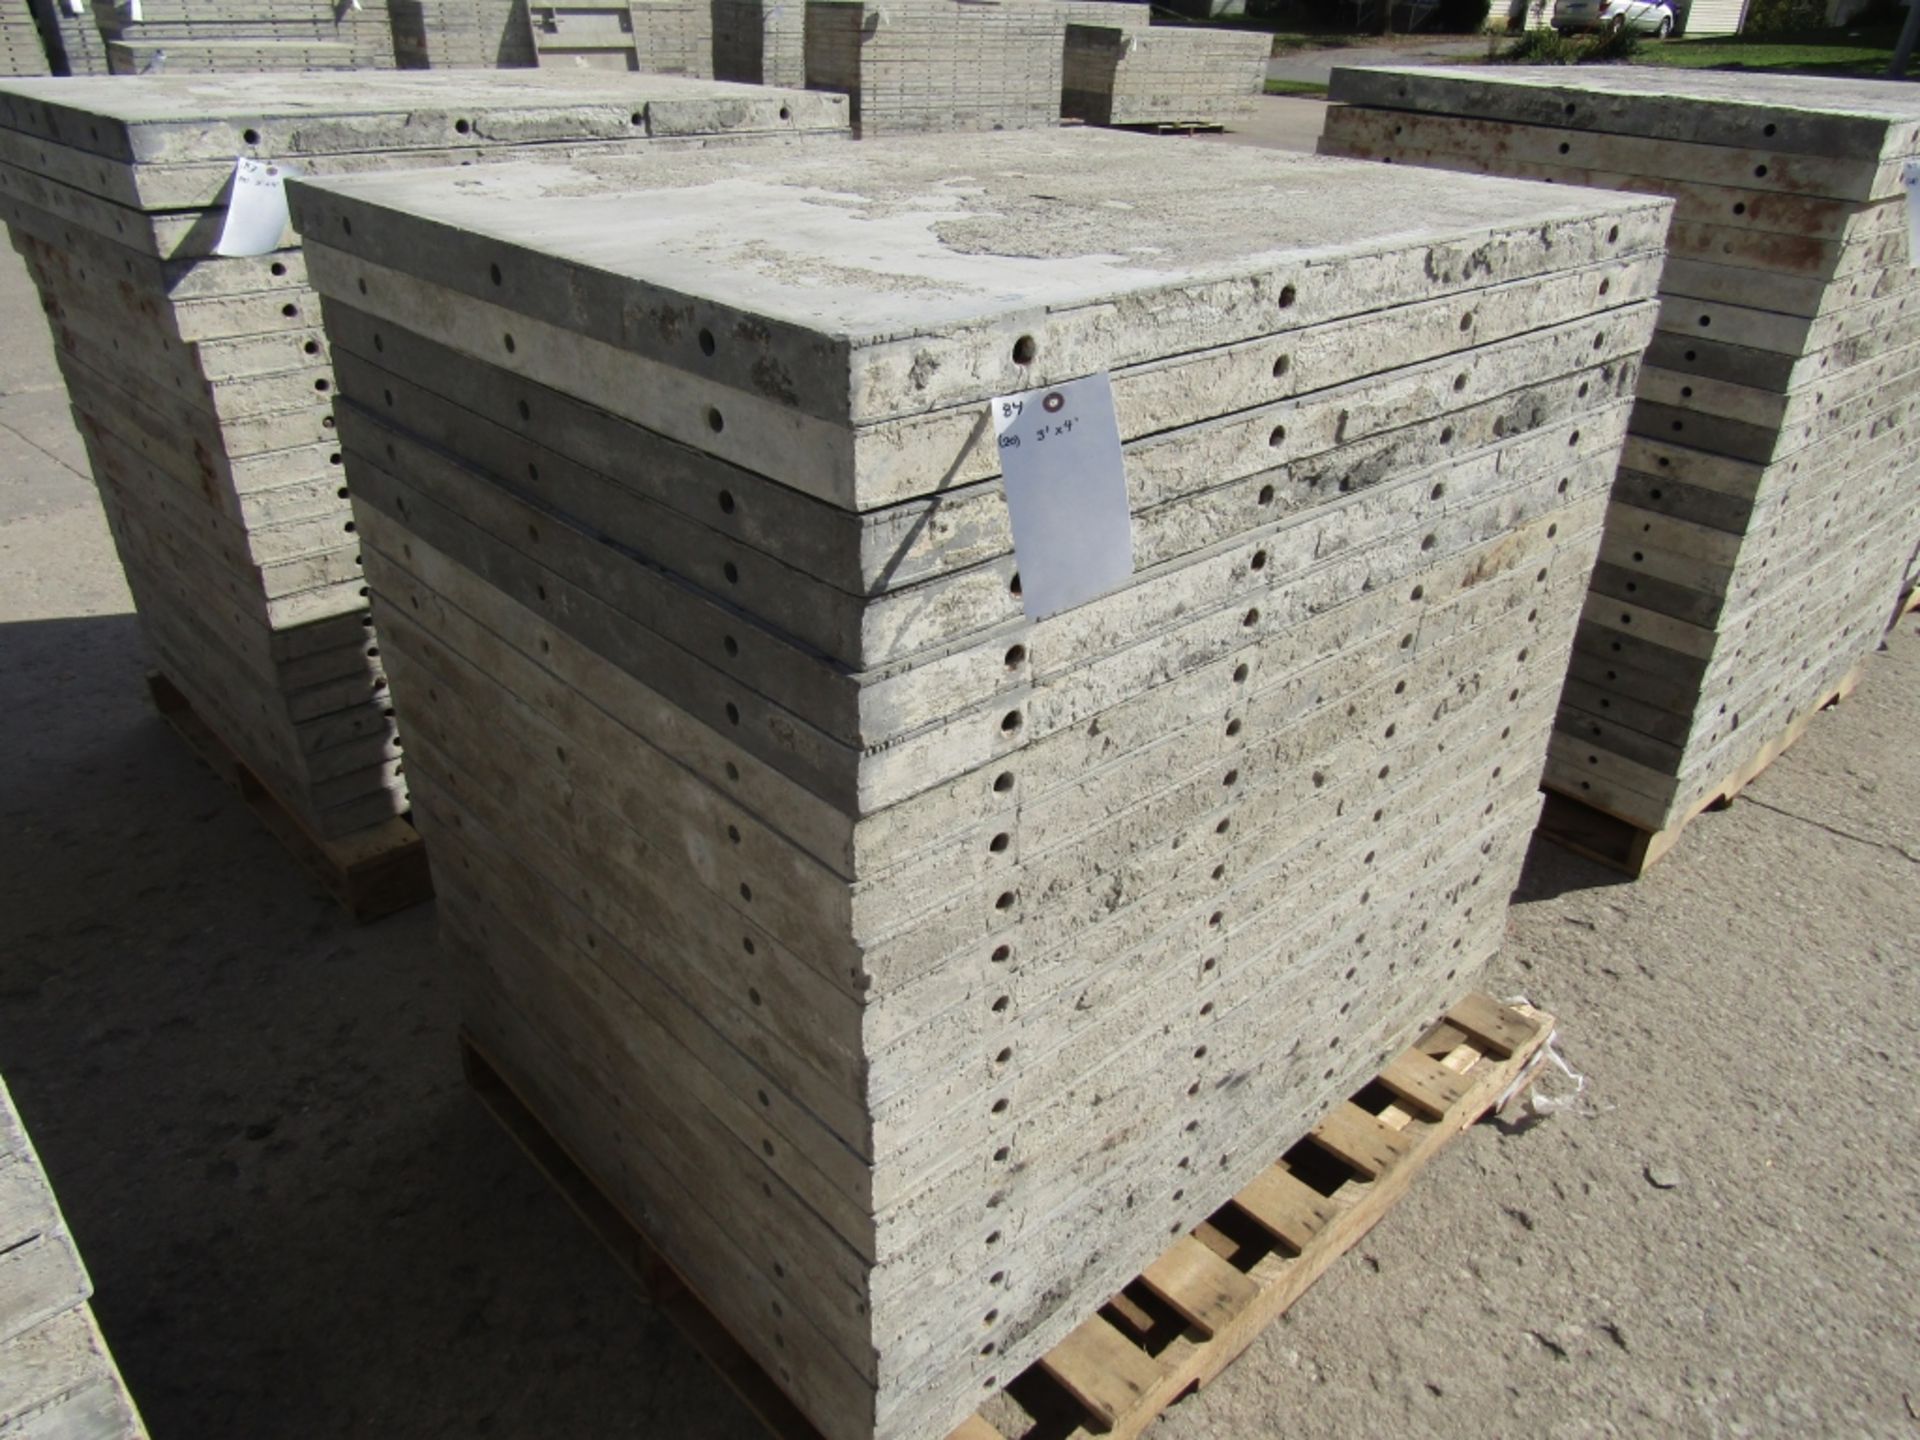 (20) 36" x 4' Durand Concrete Forms, Smooth 6-12 Hole Pattern, Attached Hardware, Located in Mt.